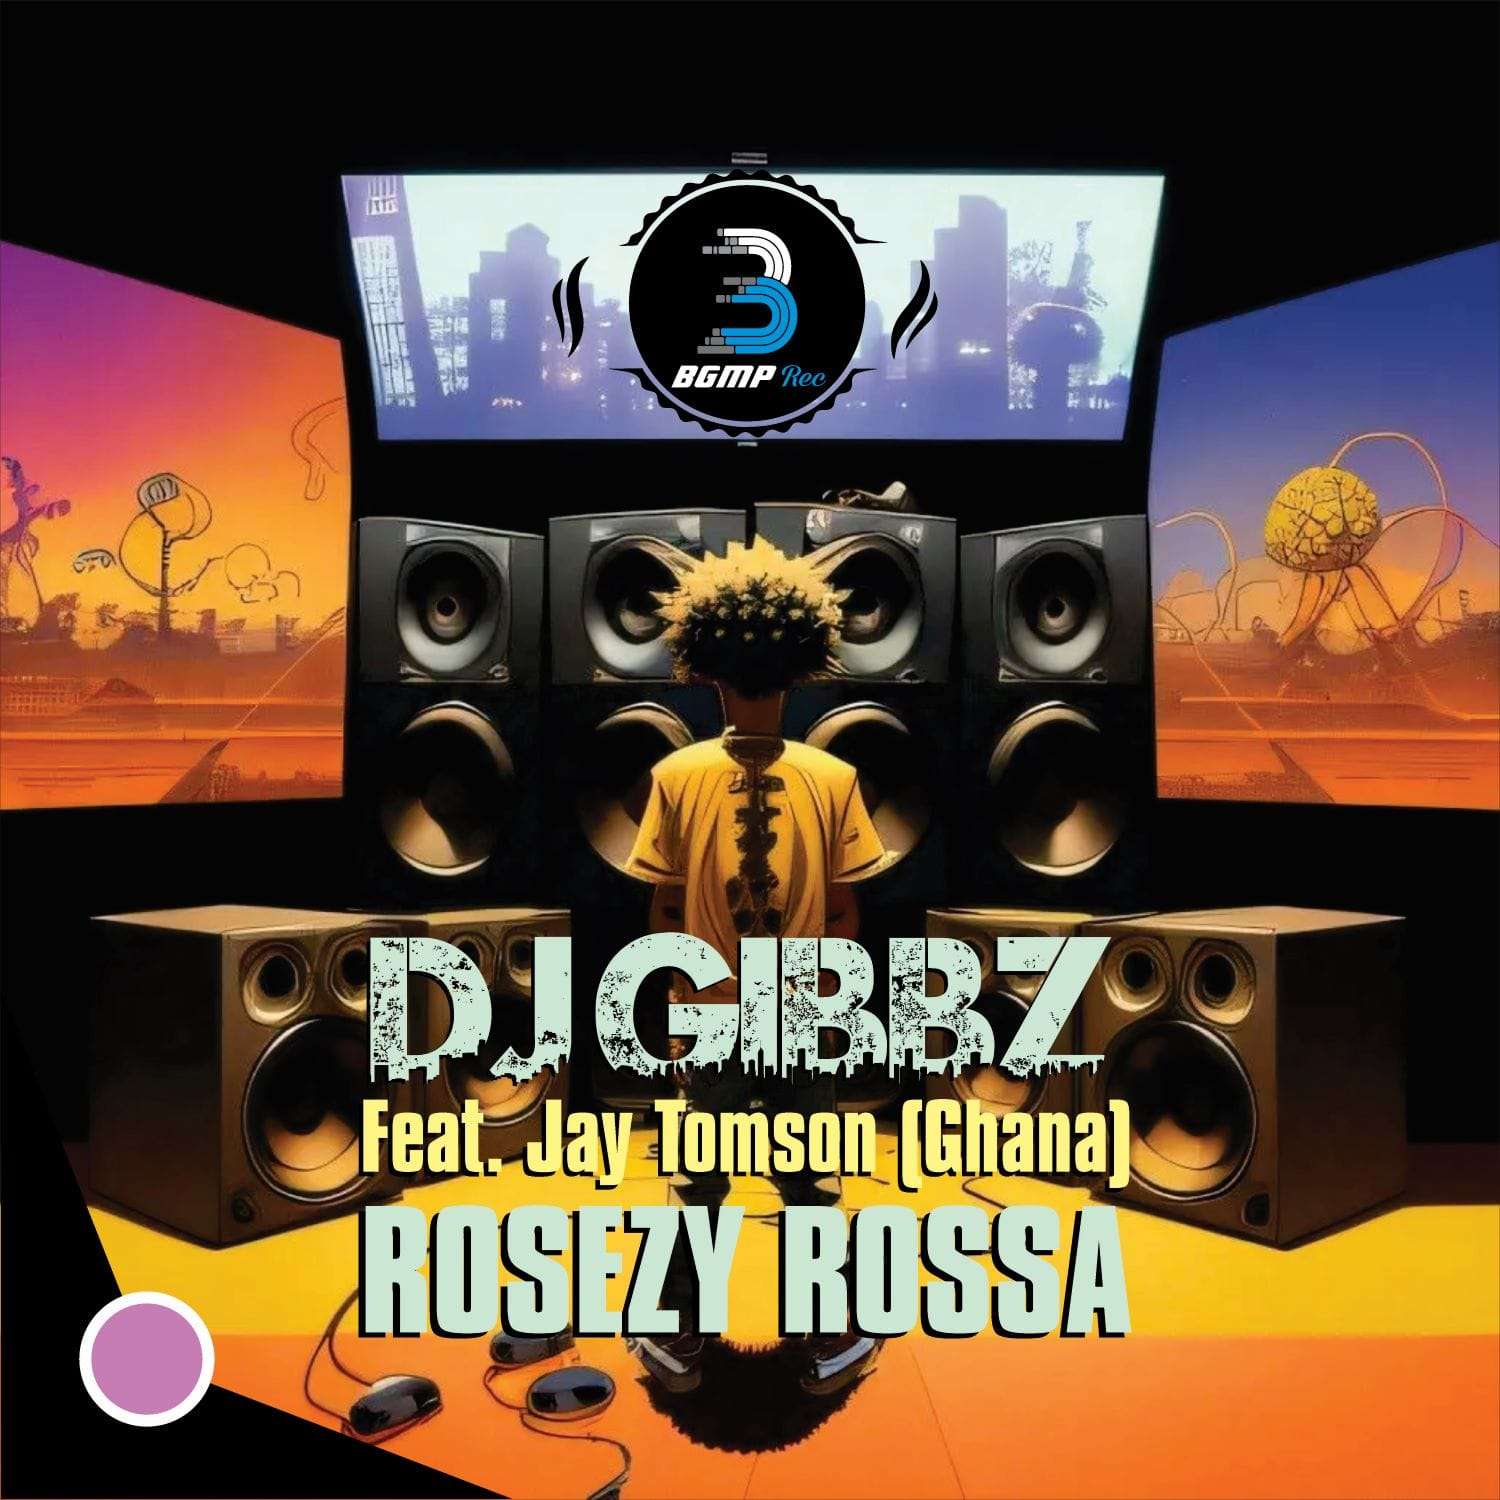 Dj Gibbz’ single titled Rosezy Rossa featuring Jay Tomson on vocals goes viral